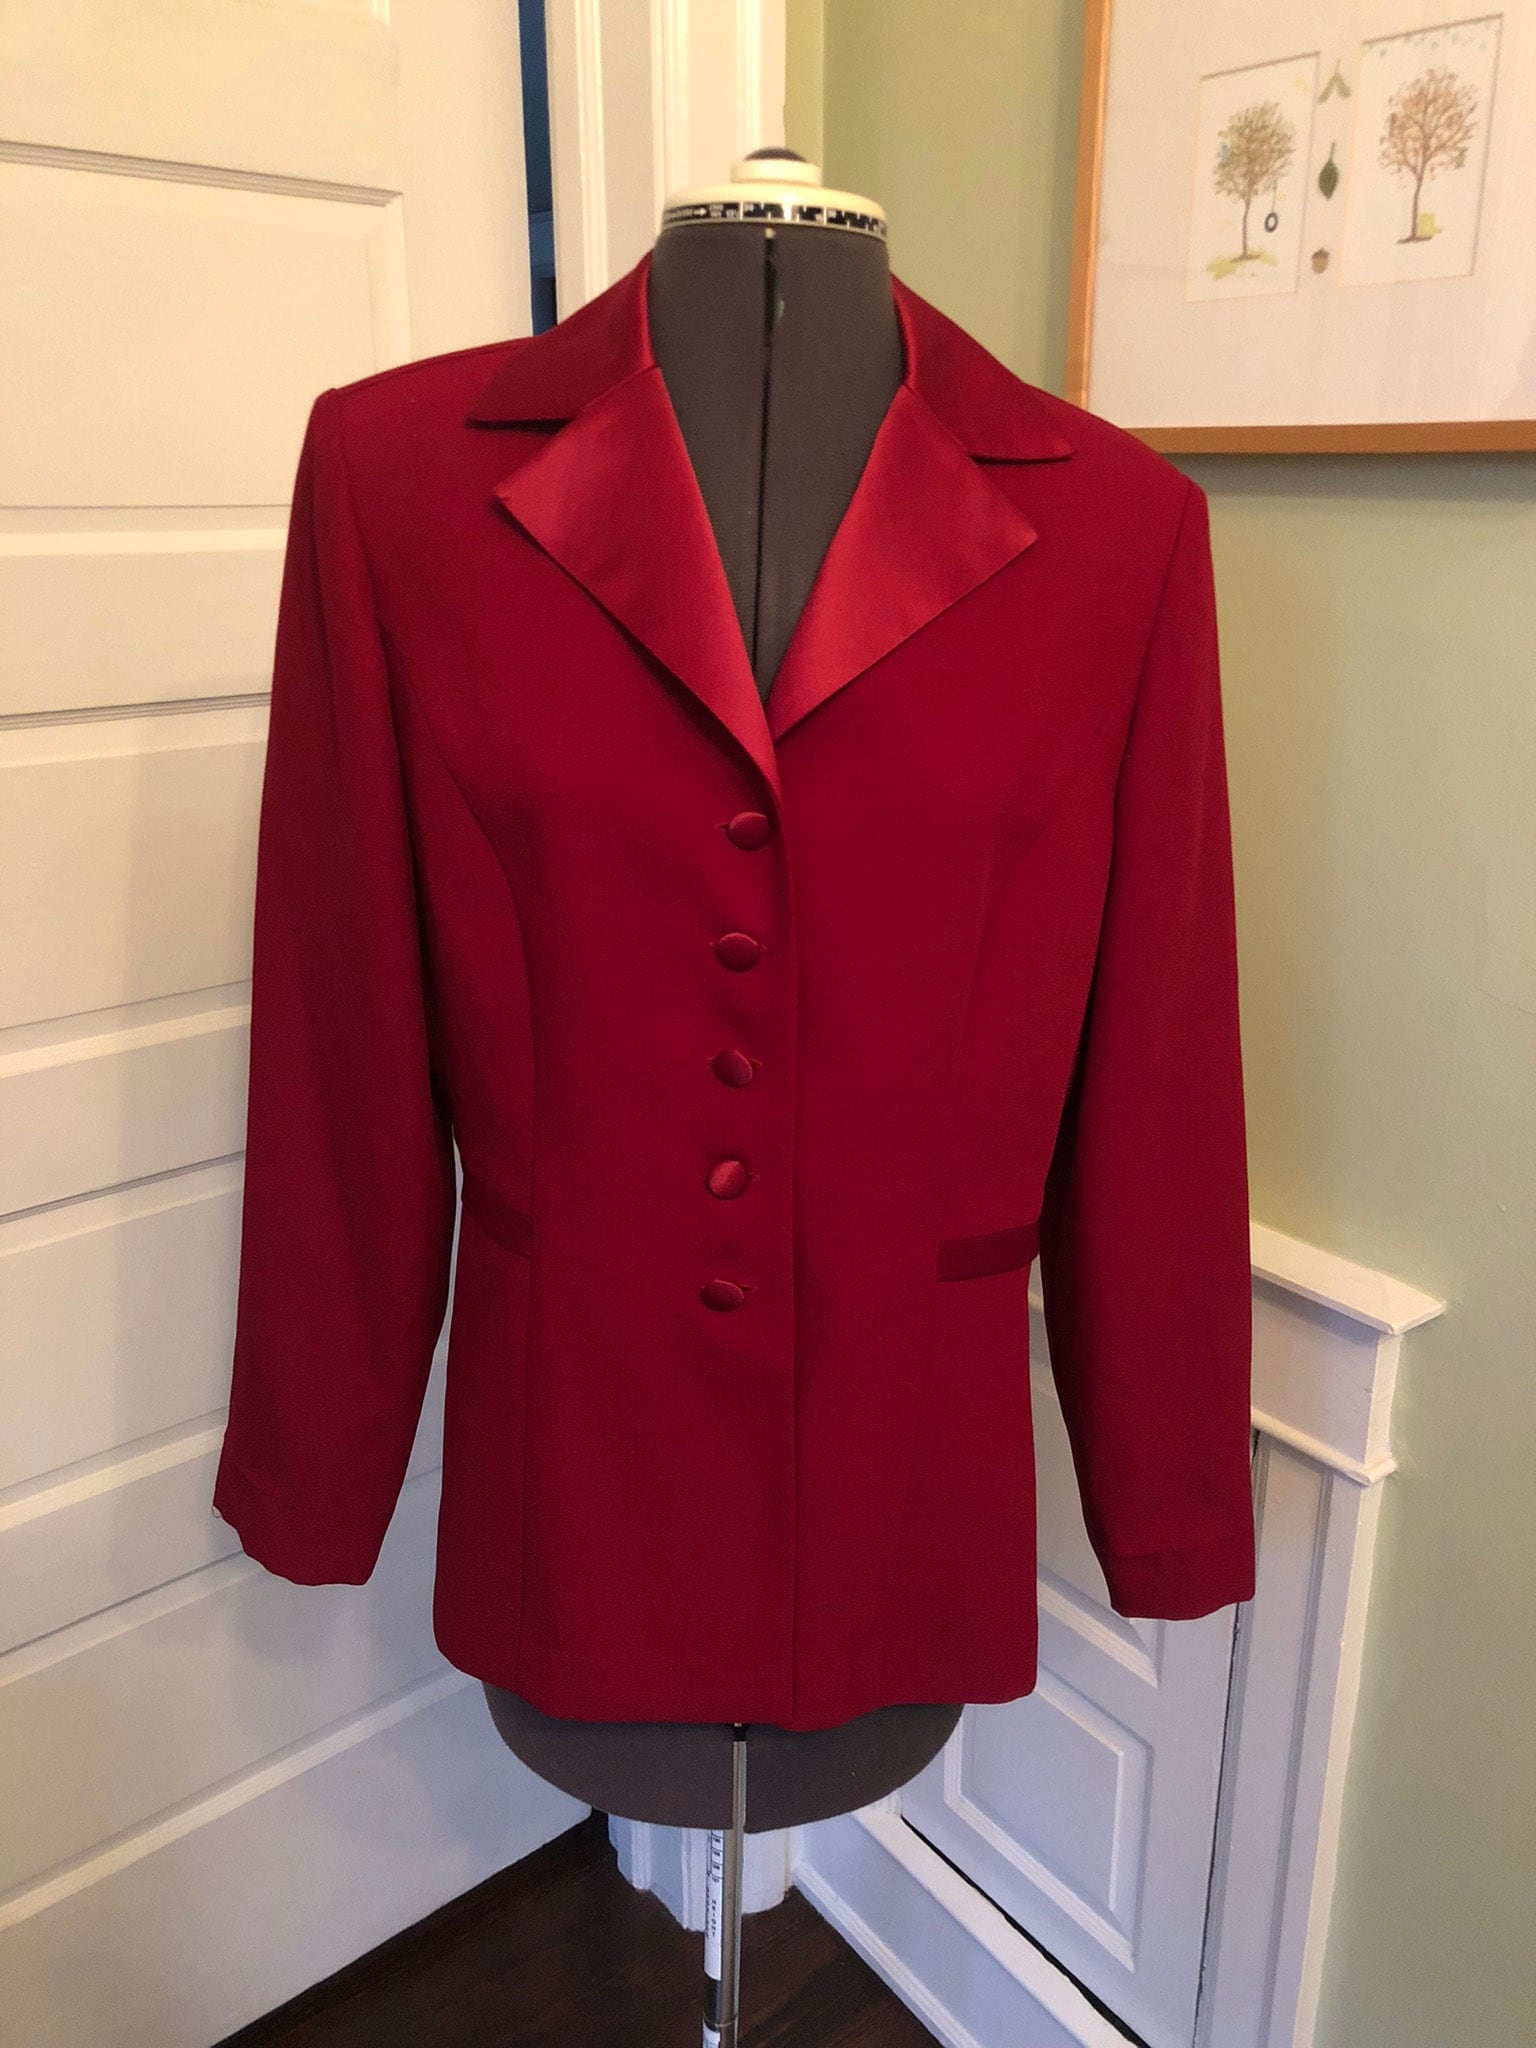 Red Suit Jacket Womens, Formal Pantsuit for Women, Chic Womens